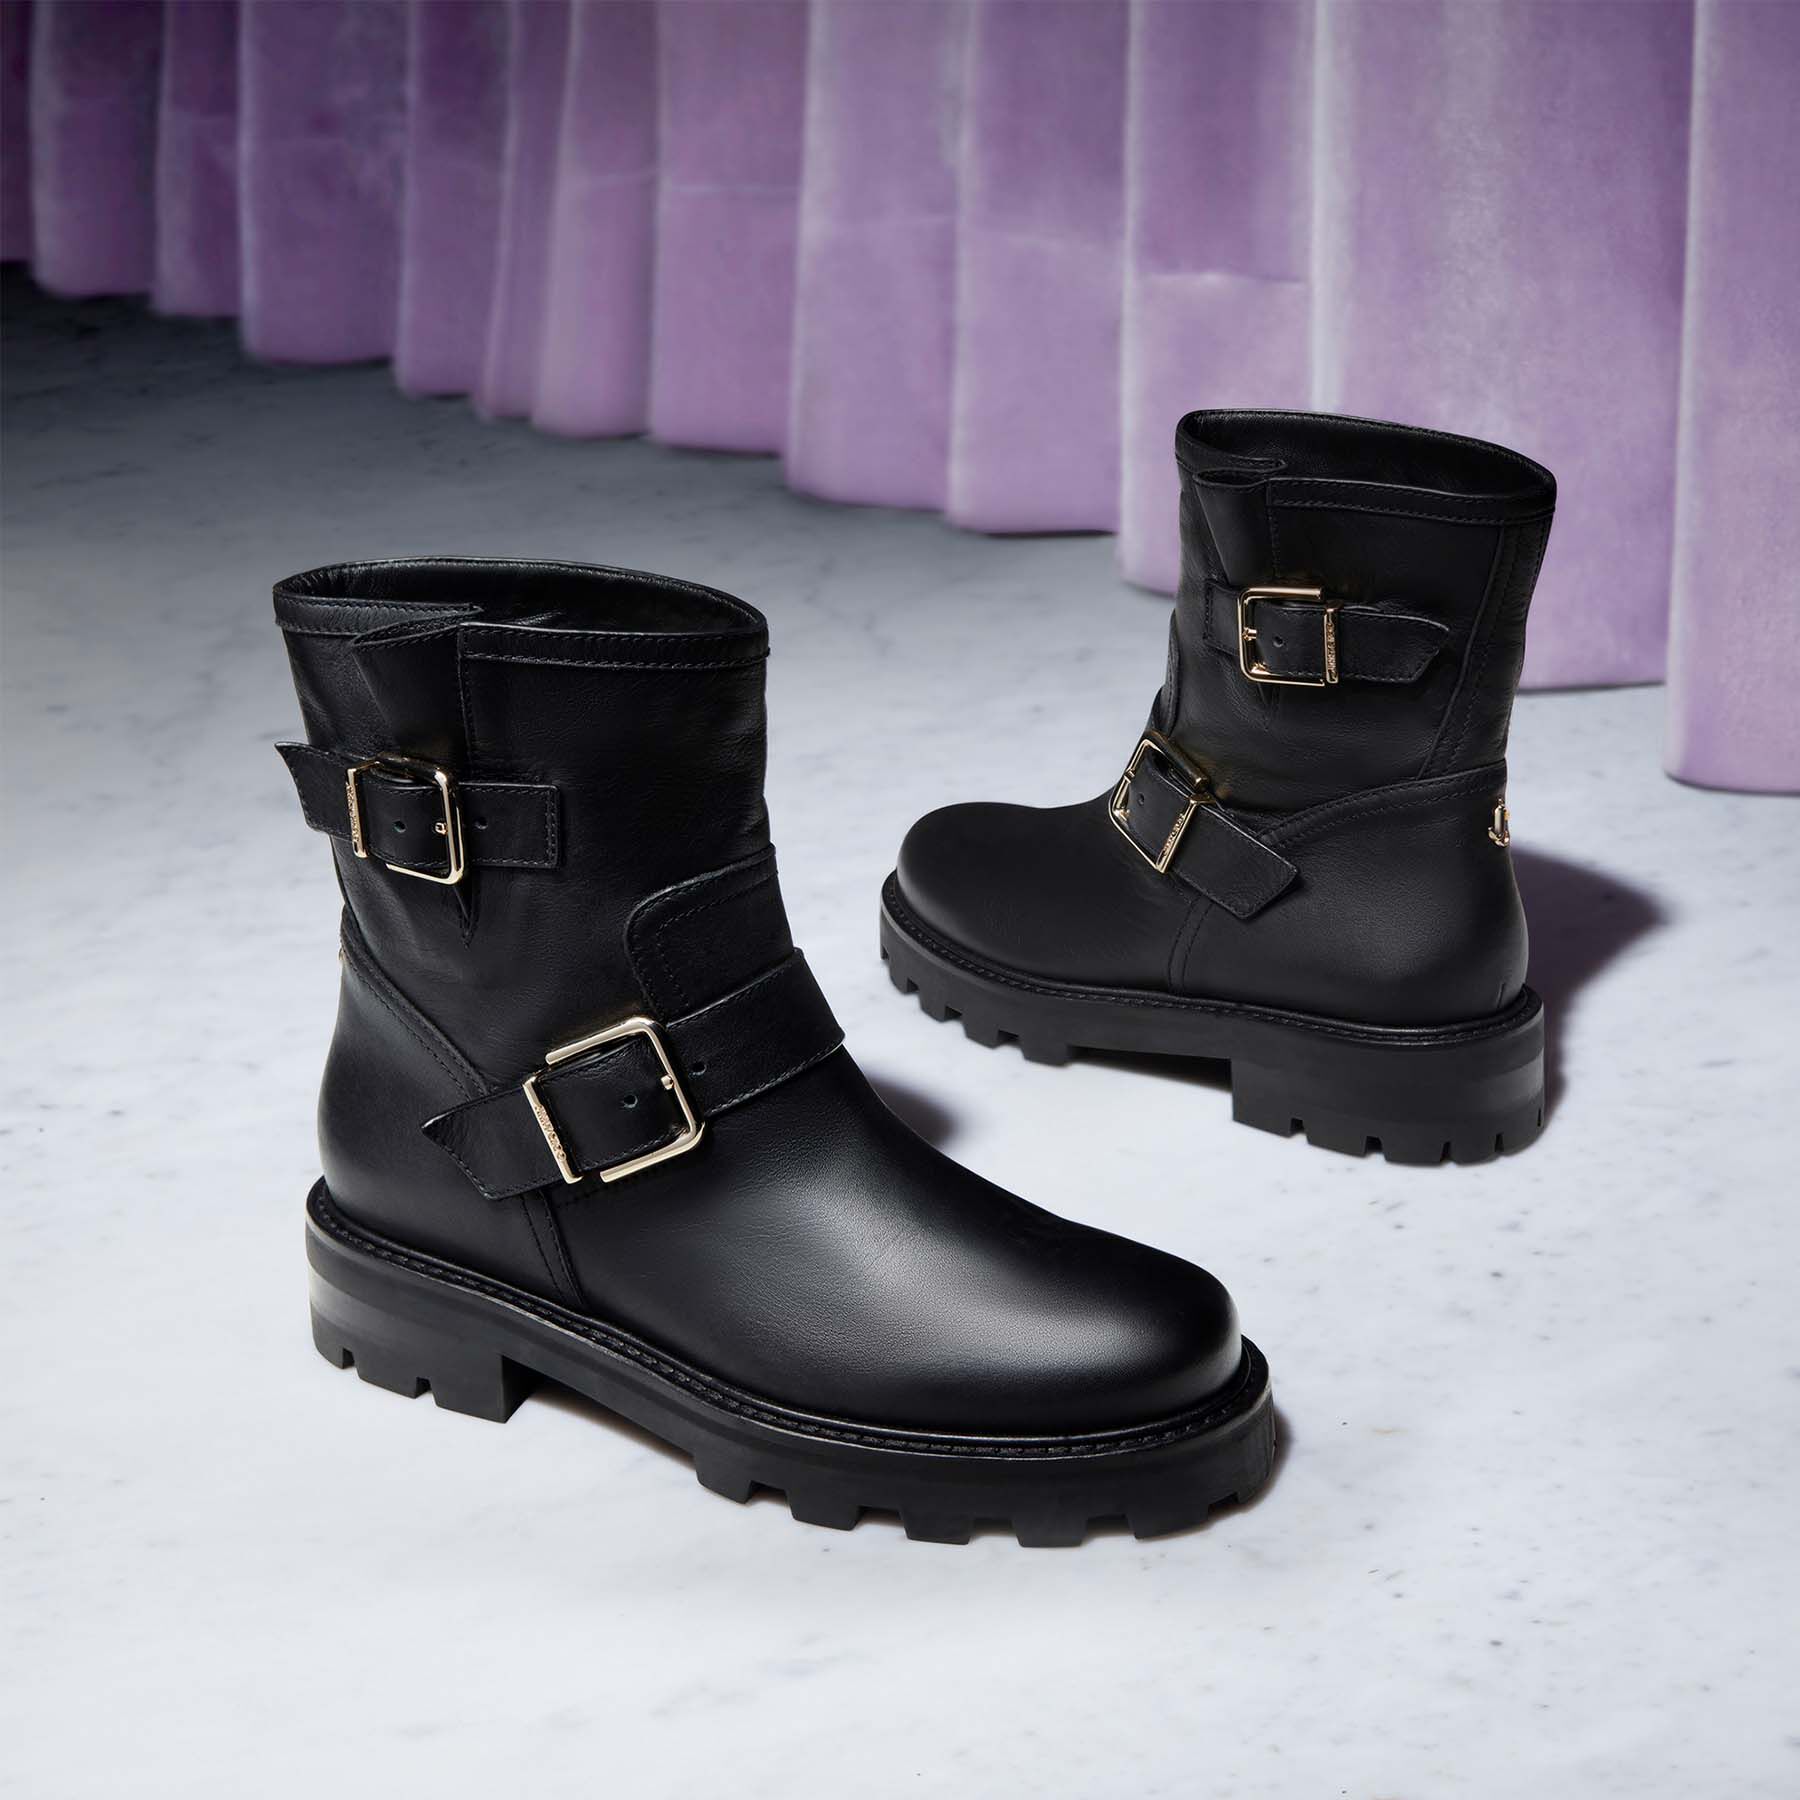 Black Smooth Leather Biker Boots with Gold Buckles | YOUTH